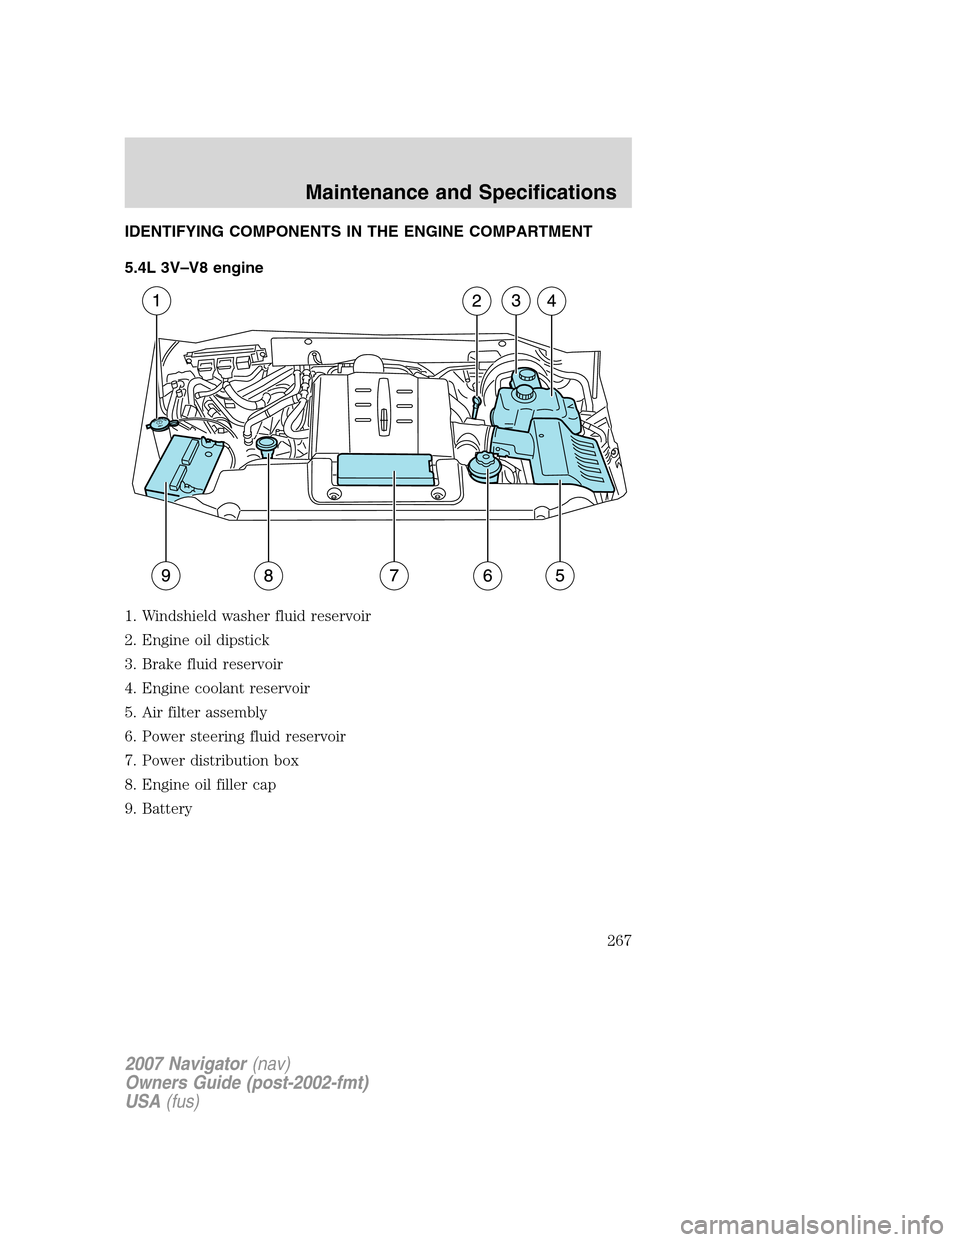 LINCOLN NAVIGATOR 2007  Owners Manual IDENTIFYING COMPONENTS IN THE ENGINE COMPARTMENT
5.4L 3V–V8 engine
1. Windshield washer fluid reservoir
2. Engine oil dipstick
3. Brake fluid reservoir
4. Engine coolant reservoir
5. Air filter asse